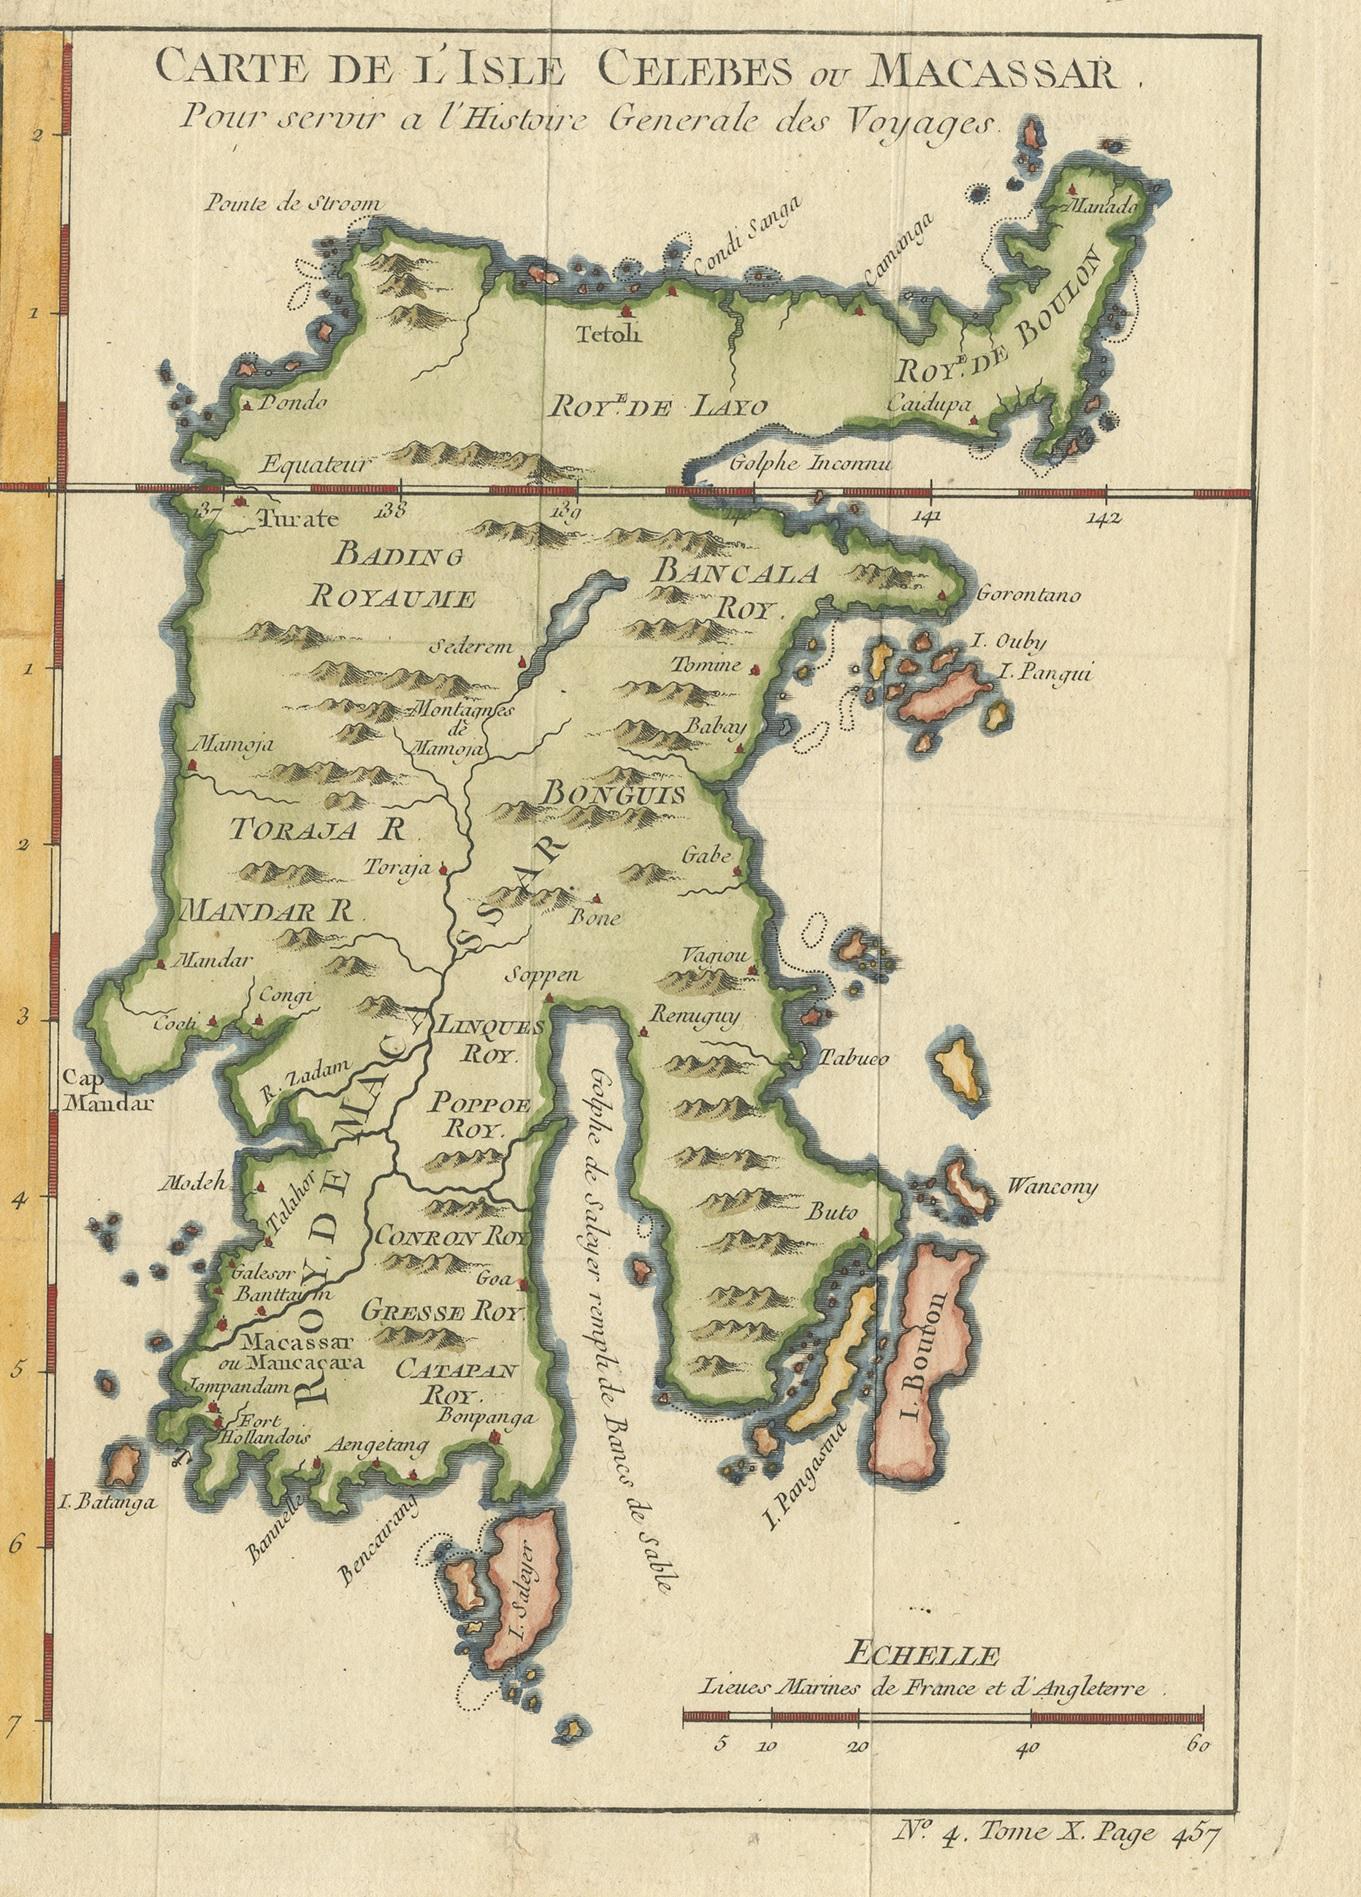 Antique map titled 'Carte de l'Isle Celebes ou Macassar'. Map of Celebes (Sulawesi, Indonesia), showing Makassar, which was the most important trading city of eastern Indonesia in the sixteenth century. Makassar traded in spices, pearls, gold and